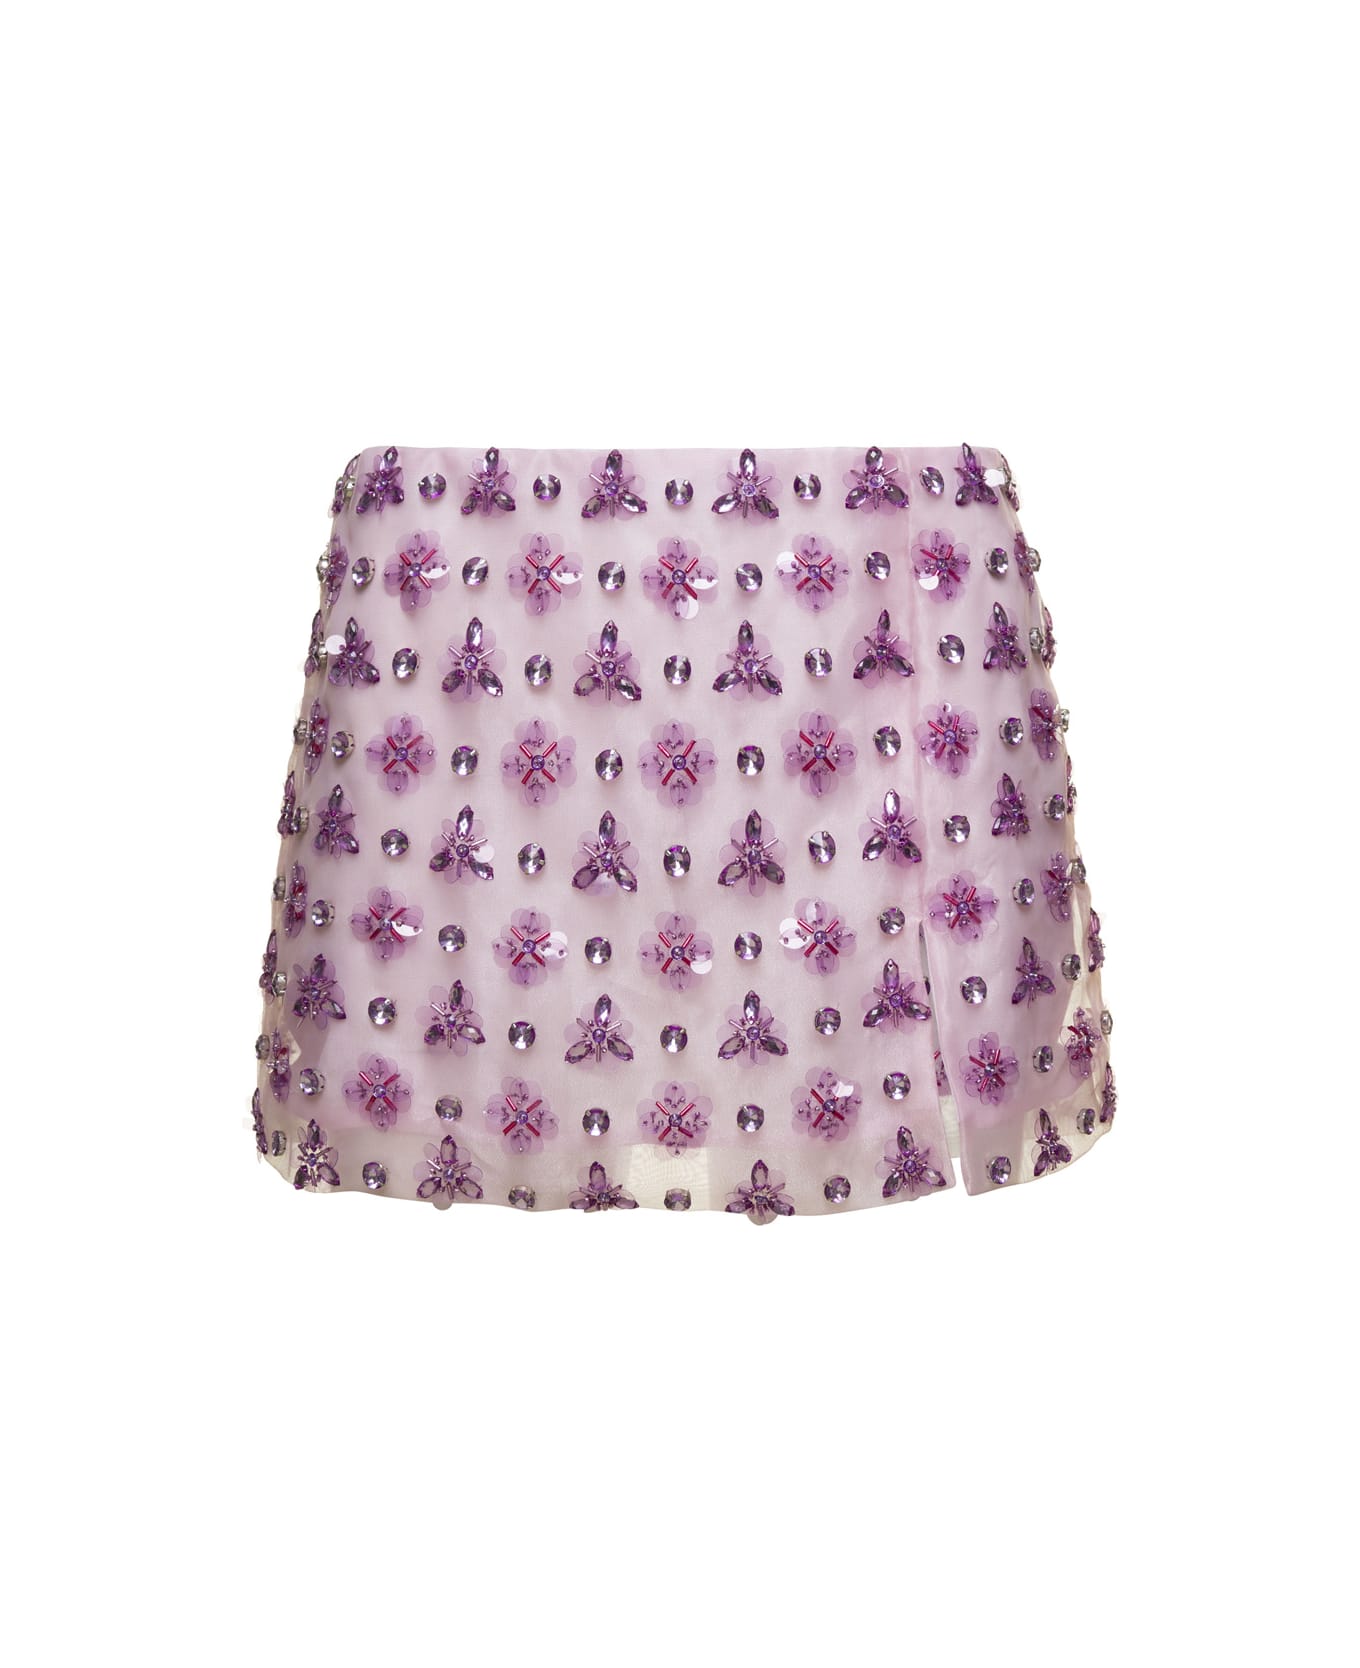 Des Phemmes Pink Geometric Mini Skirt With Crystal Embellishment In Organza Woman - Violet